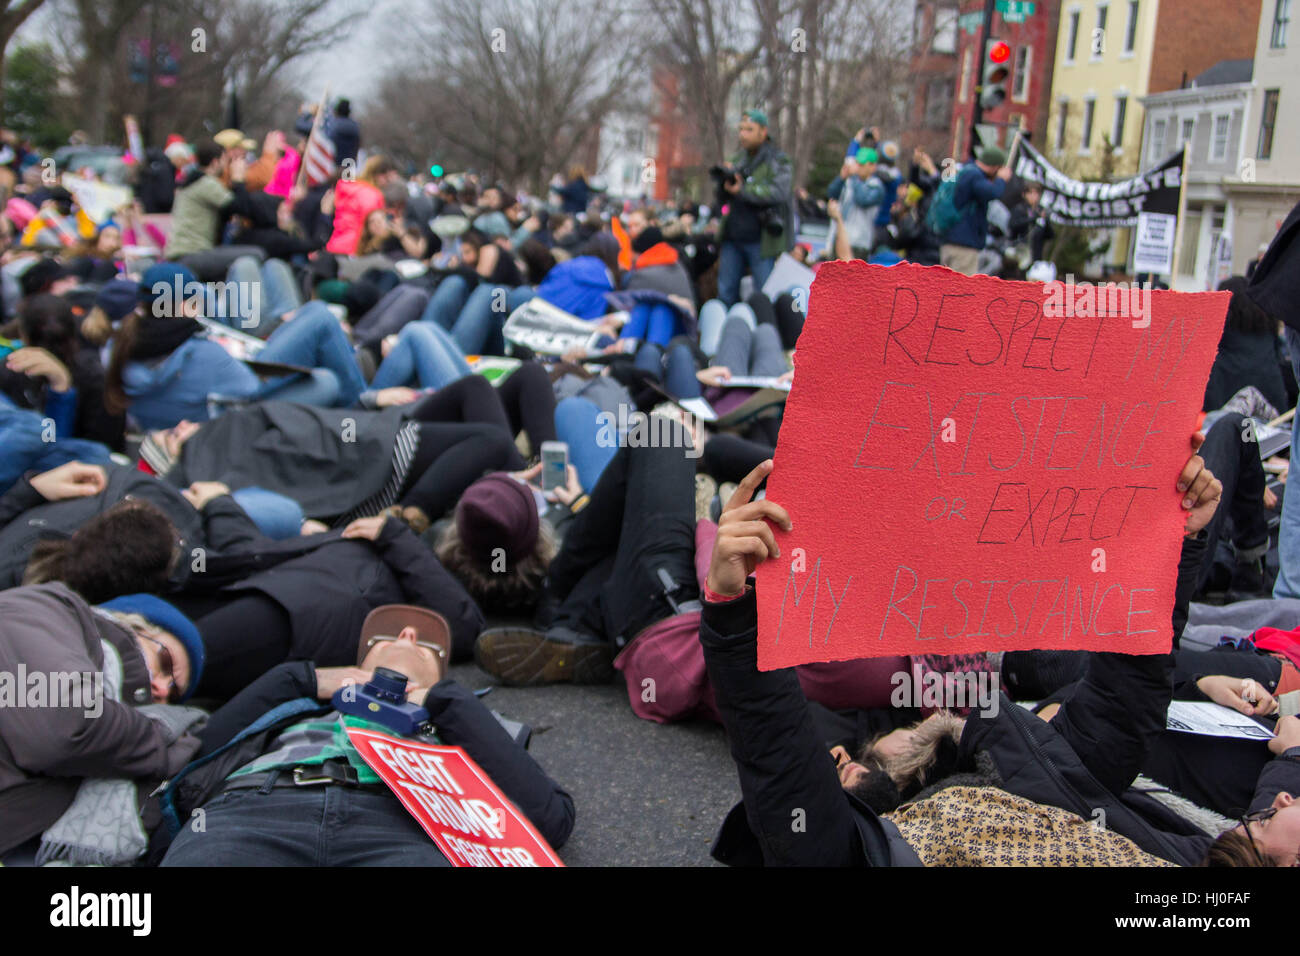 Washington DC, USA. 20th January, 2017. Protestors march voicing concerns about newly inaugurated President Donald Trump on the streets of Washington, DC, Friday, January 20, 2017. Credit: Michael Candelori/Alamy Live News Stock Photo